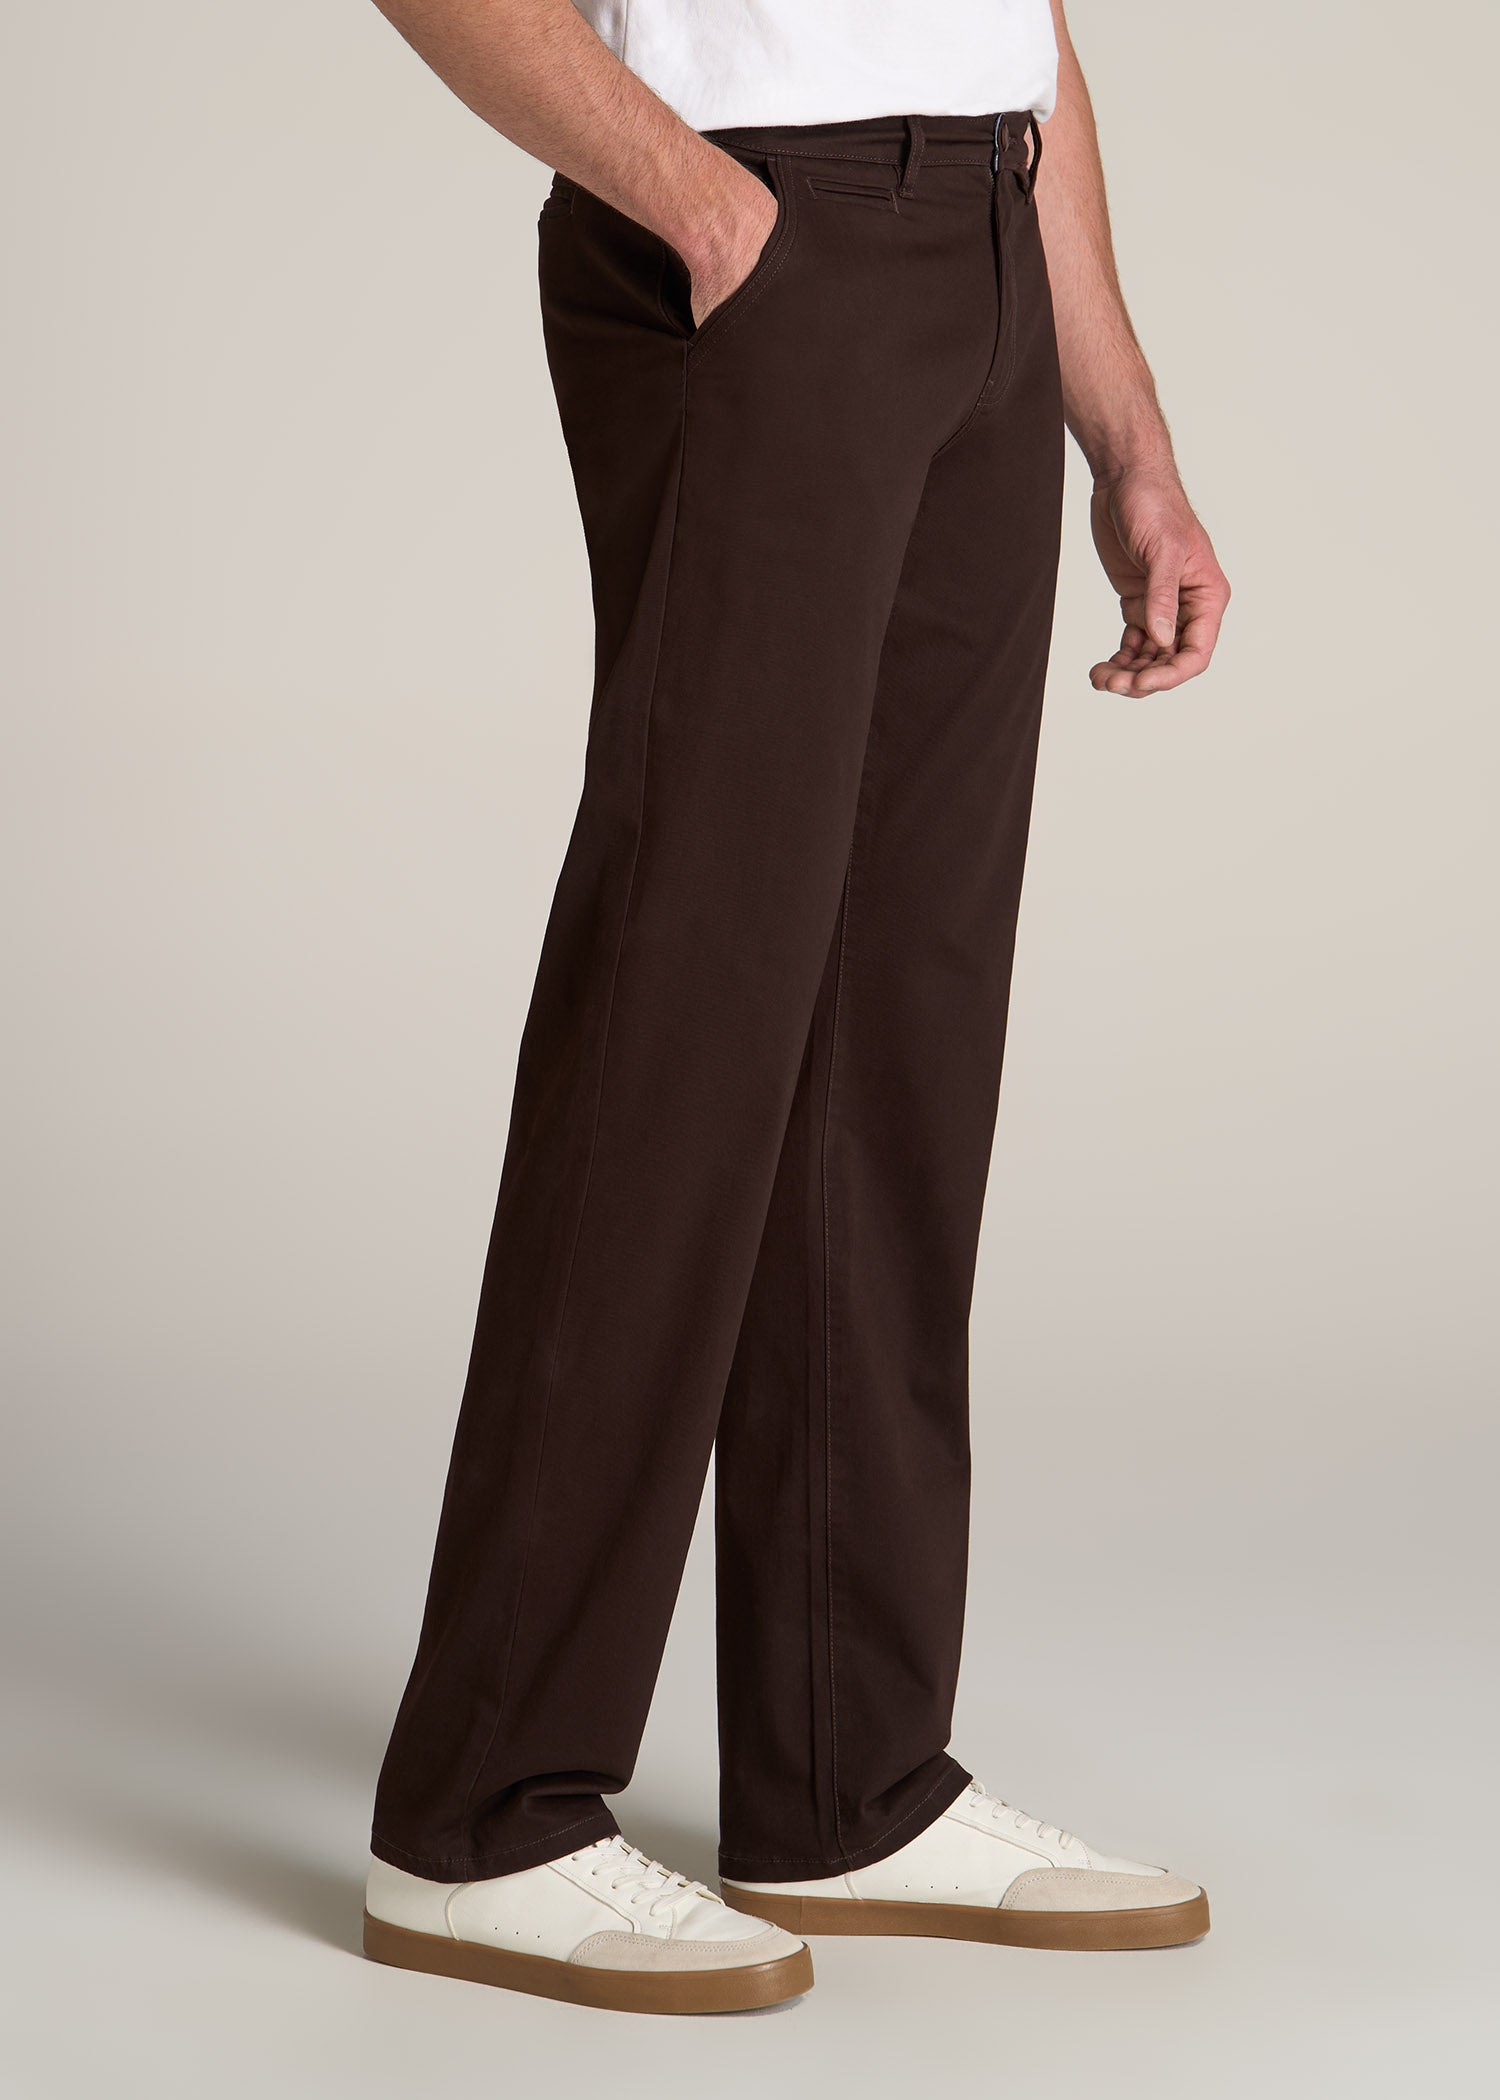 Men's Relaxed Fit Pants: Chinos, Khakis & More